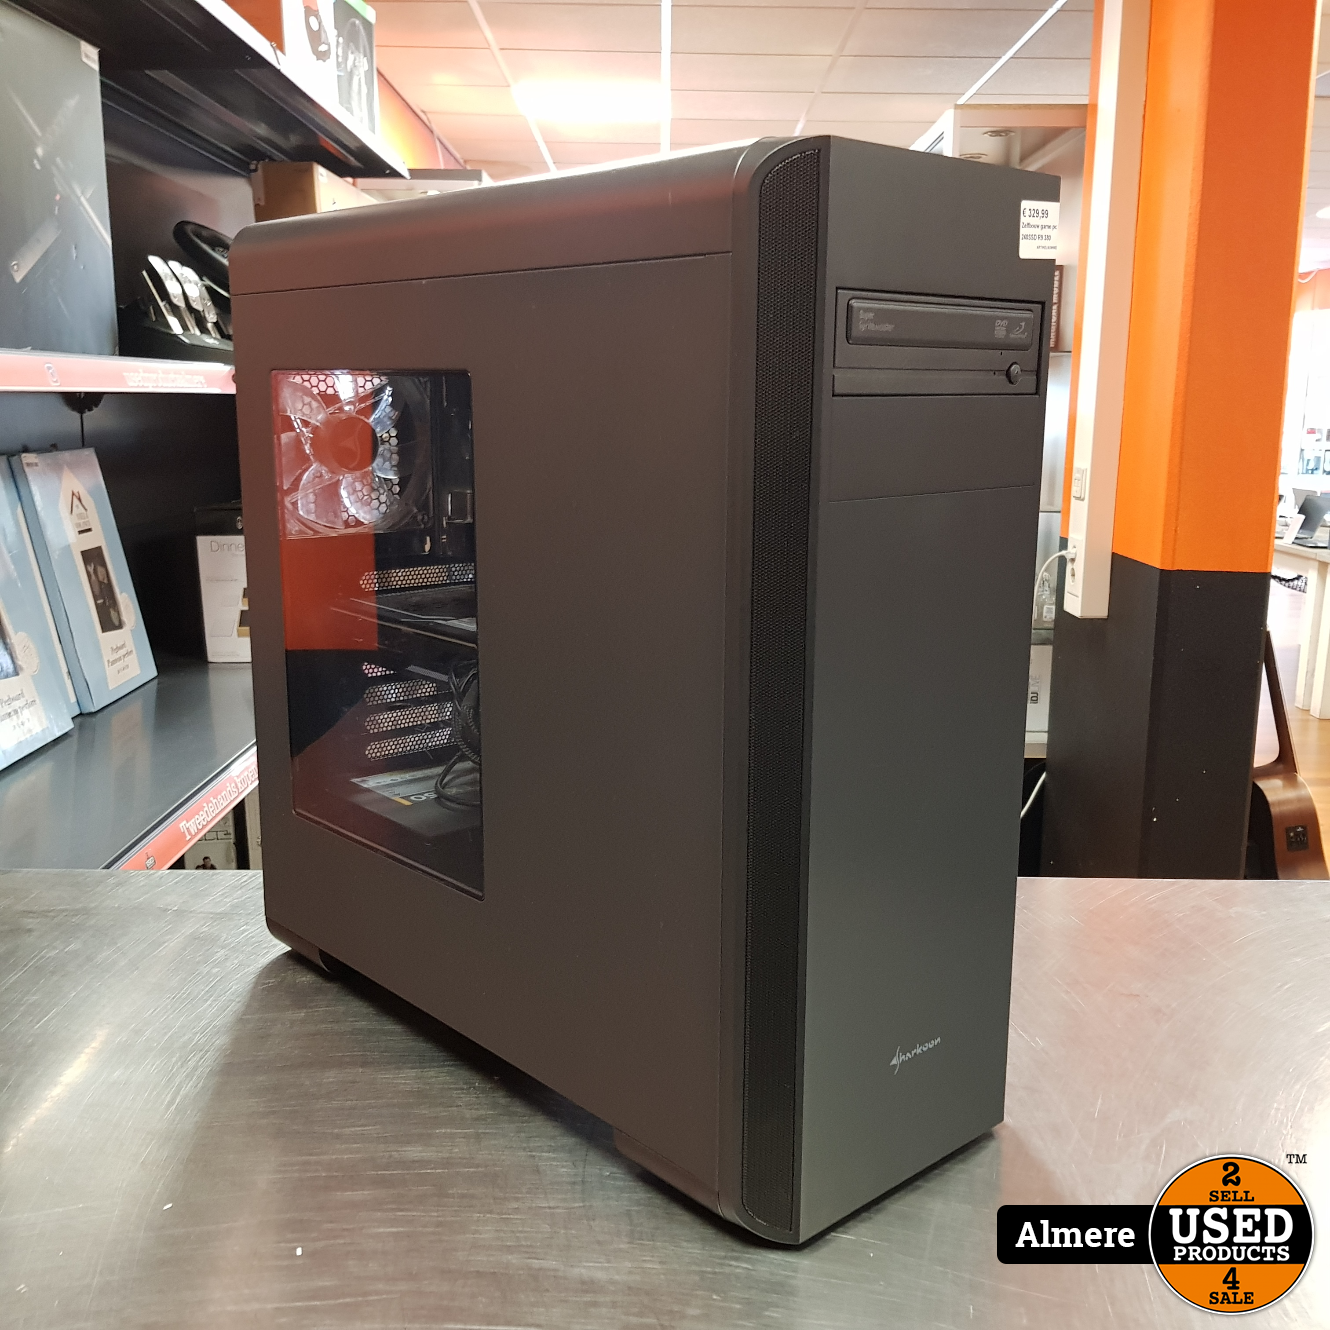 Sharkoon Zelfbouw Game PC i5 16GB 240SSD 2TB HDD Radeon R9 380 Used Products Almere